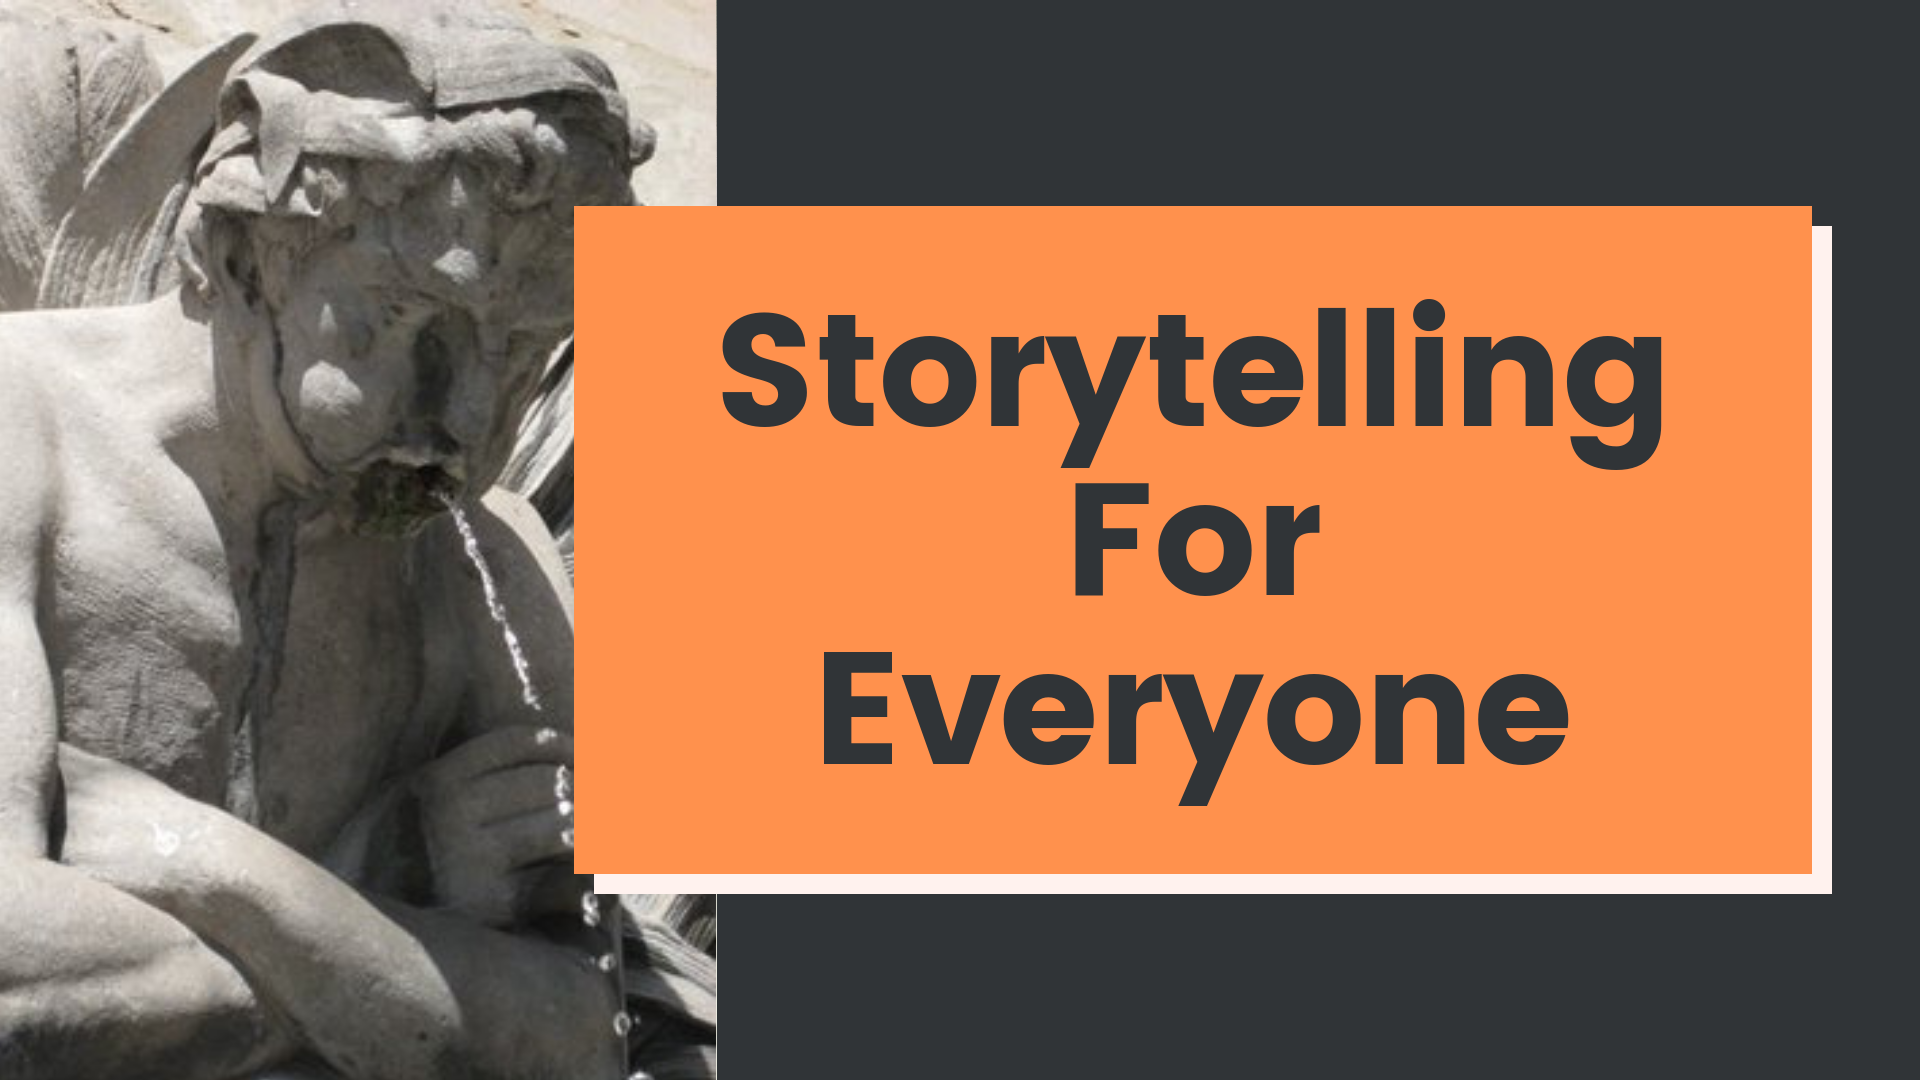 Storytelling For Everyone: Four Week Course in Personal Narrative (ONLINE - MONDAYS IN APRIL)